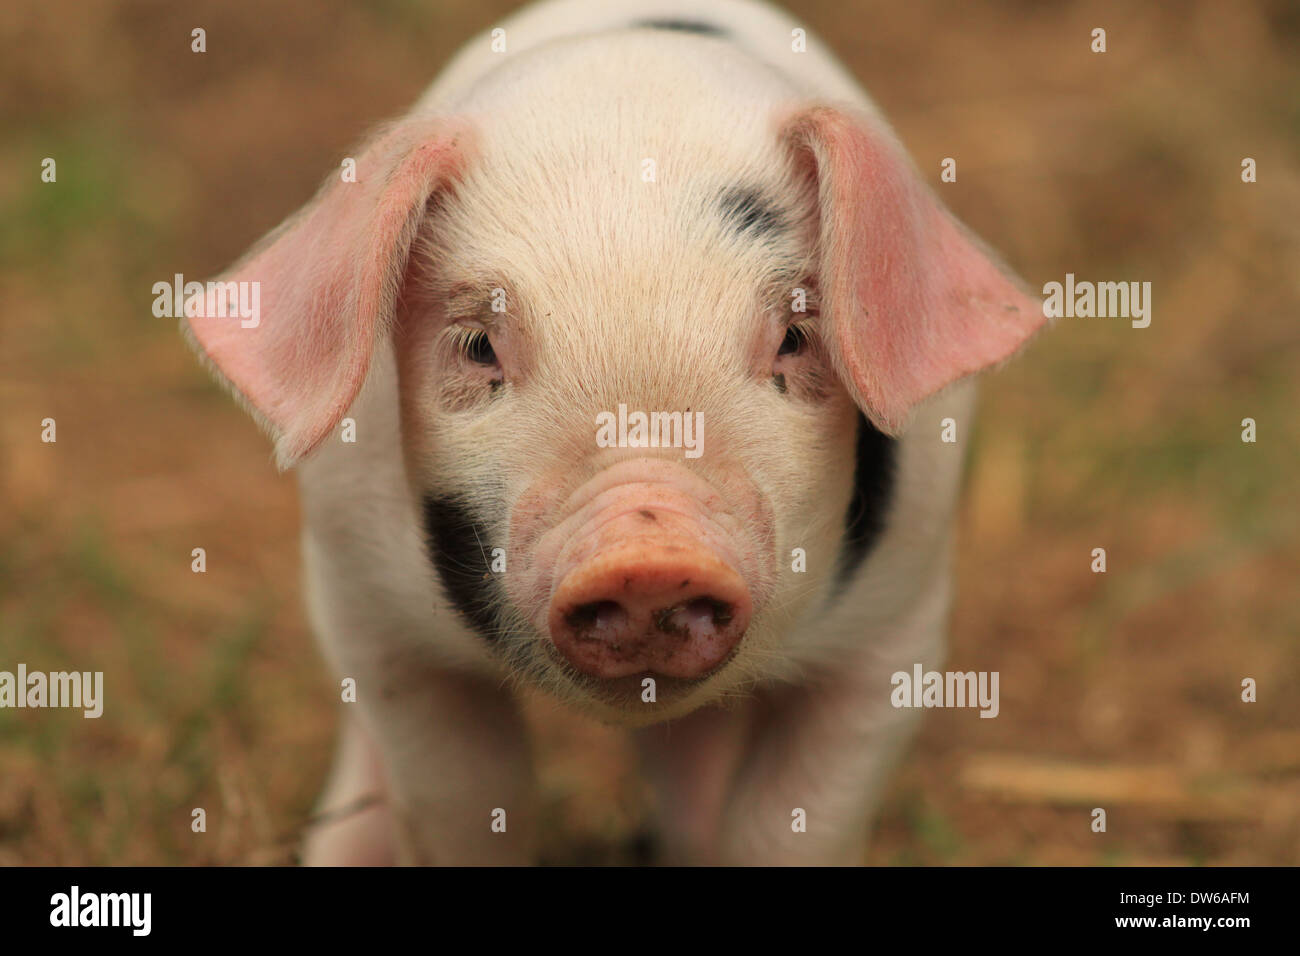 Picture of a Piglet Stock Photo